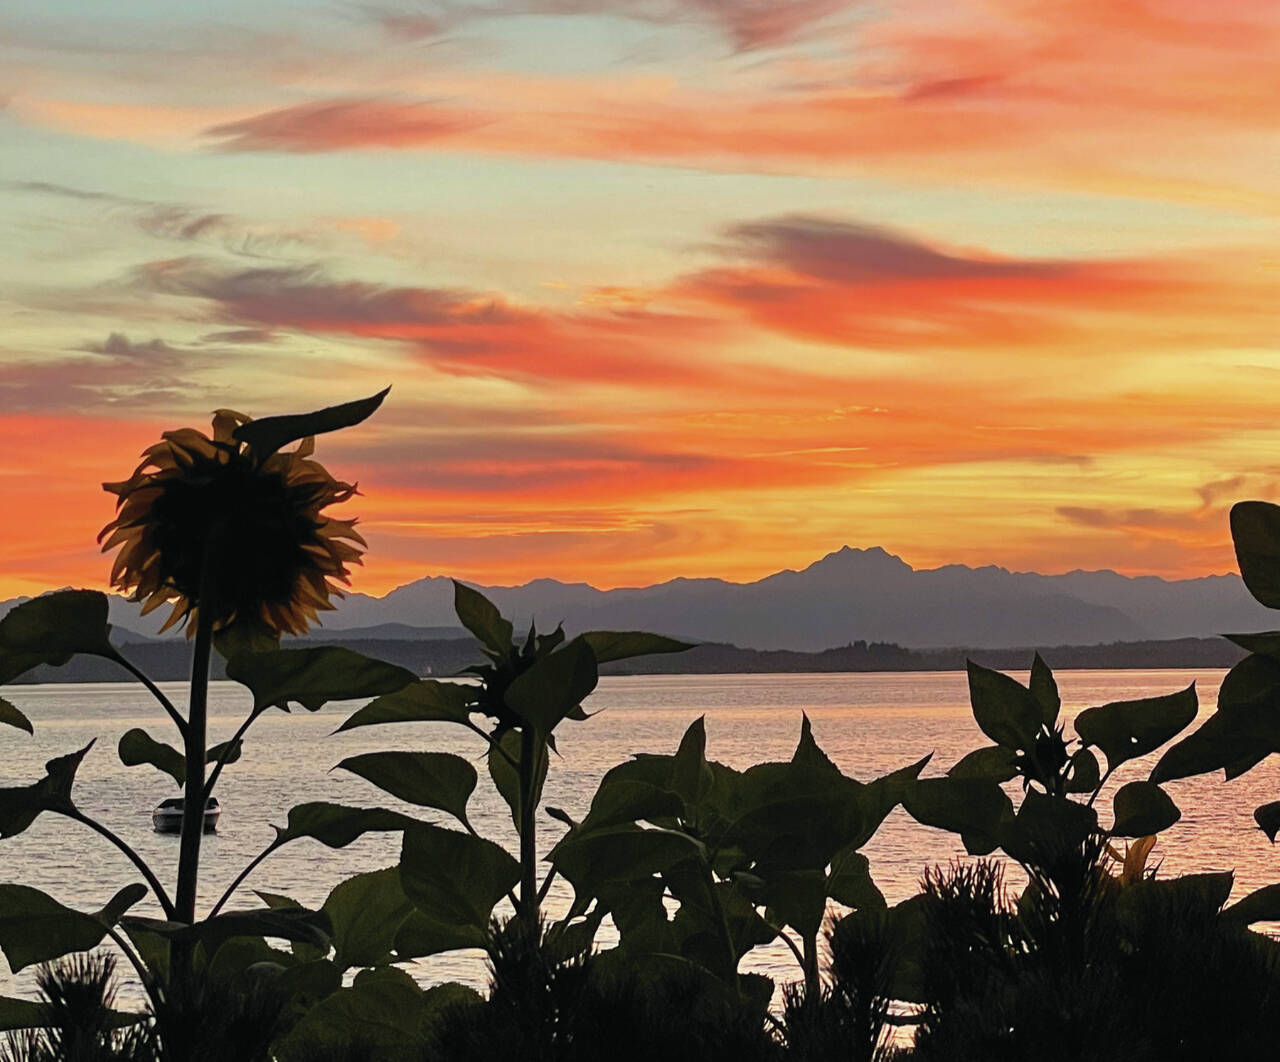 Photo courtesy of Washington State Journal / A late night summer sun sets over Puget Sound in West Seattle at 8:44 p.m.